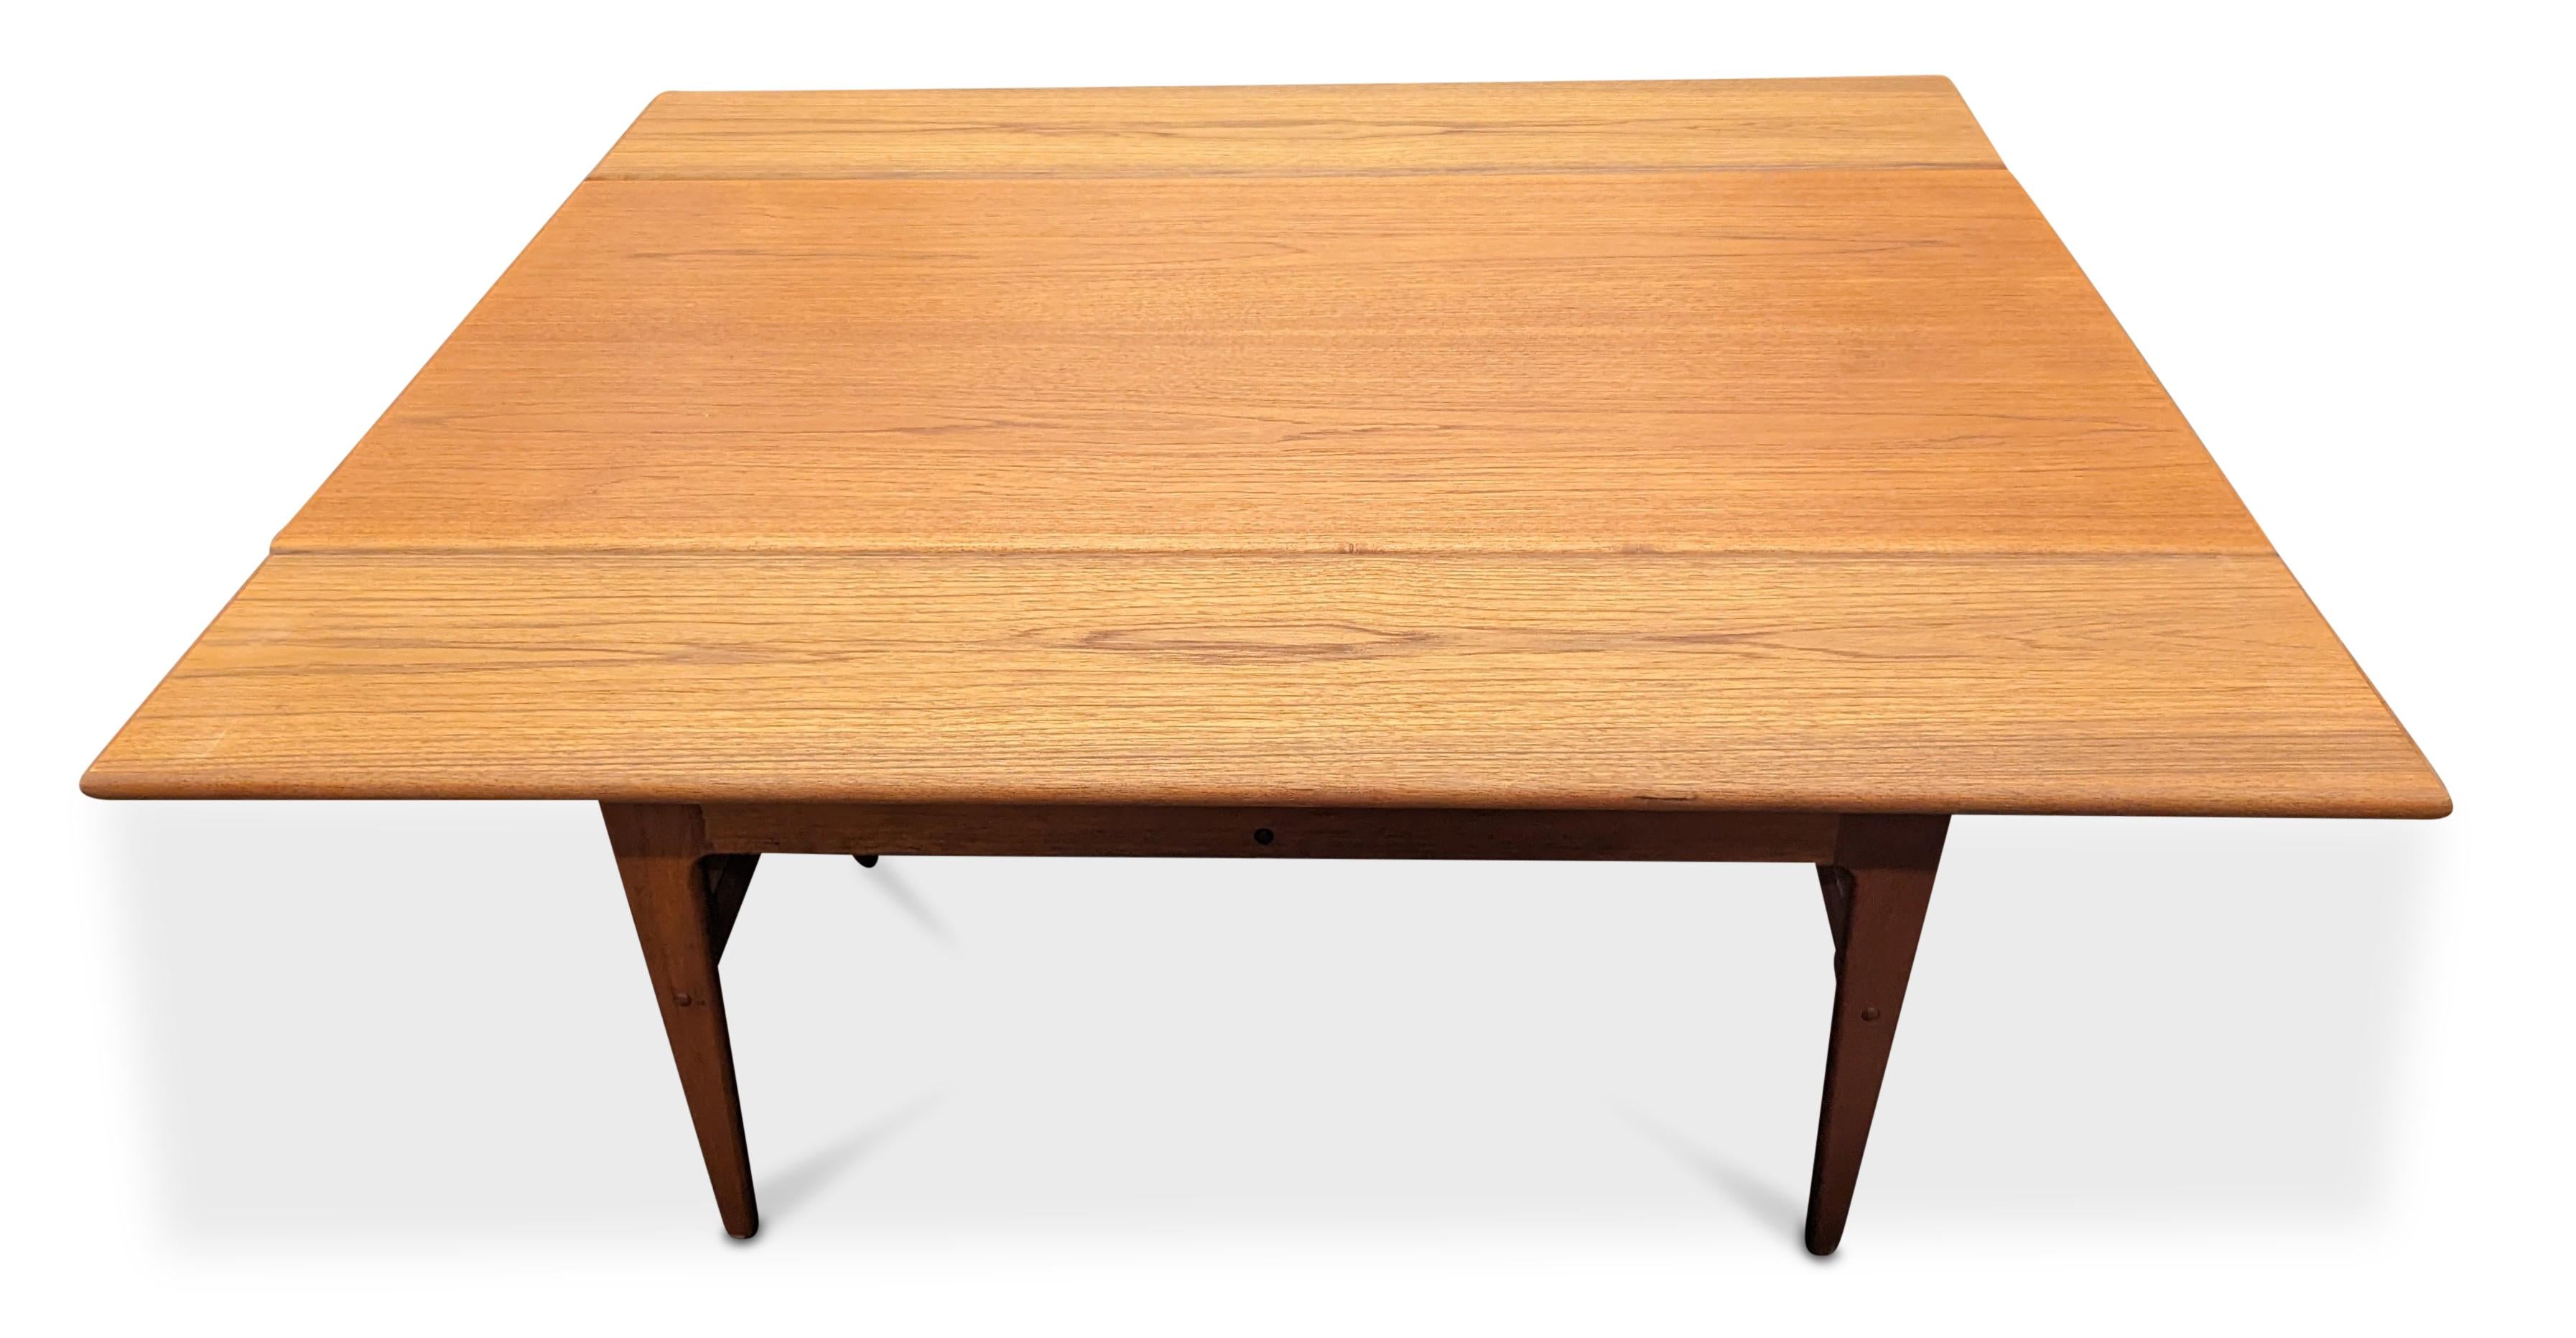 Vintage Danish MCM Copenhagen Table Dining and Coffee Table in 1 - 072366 8